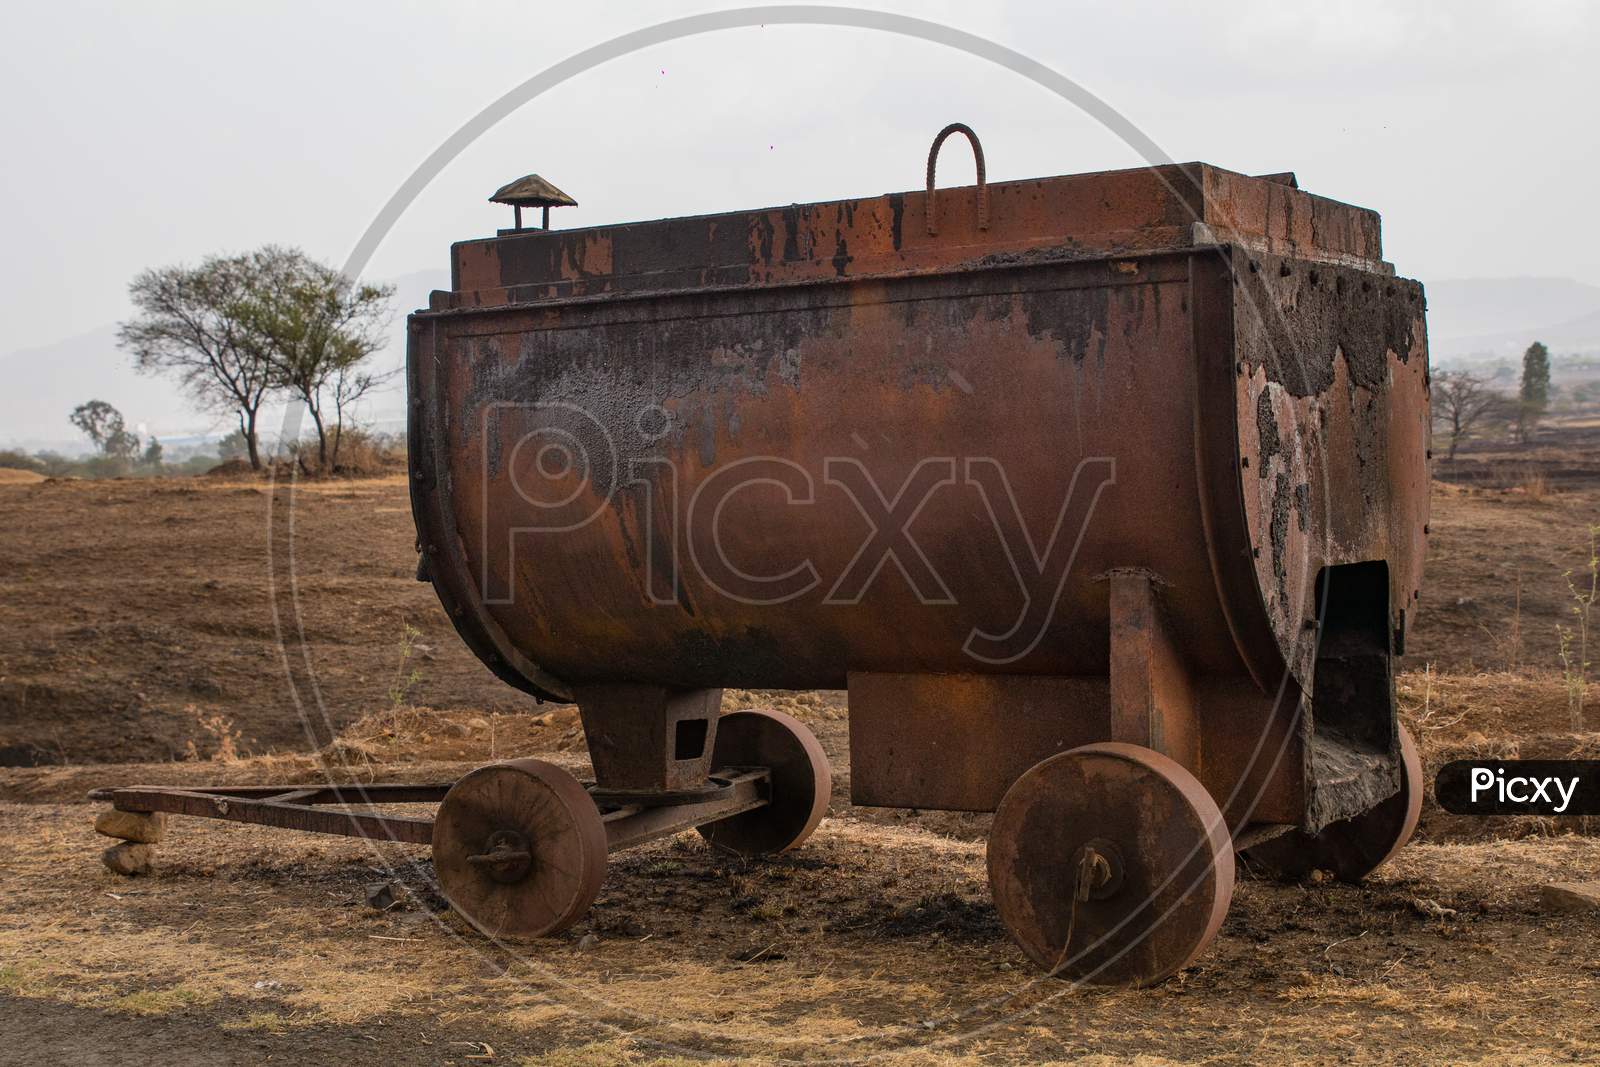 Side View Of A Mobile Tar Or Bitumen Melting Furnace Used In Road Construction